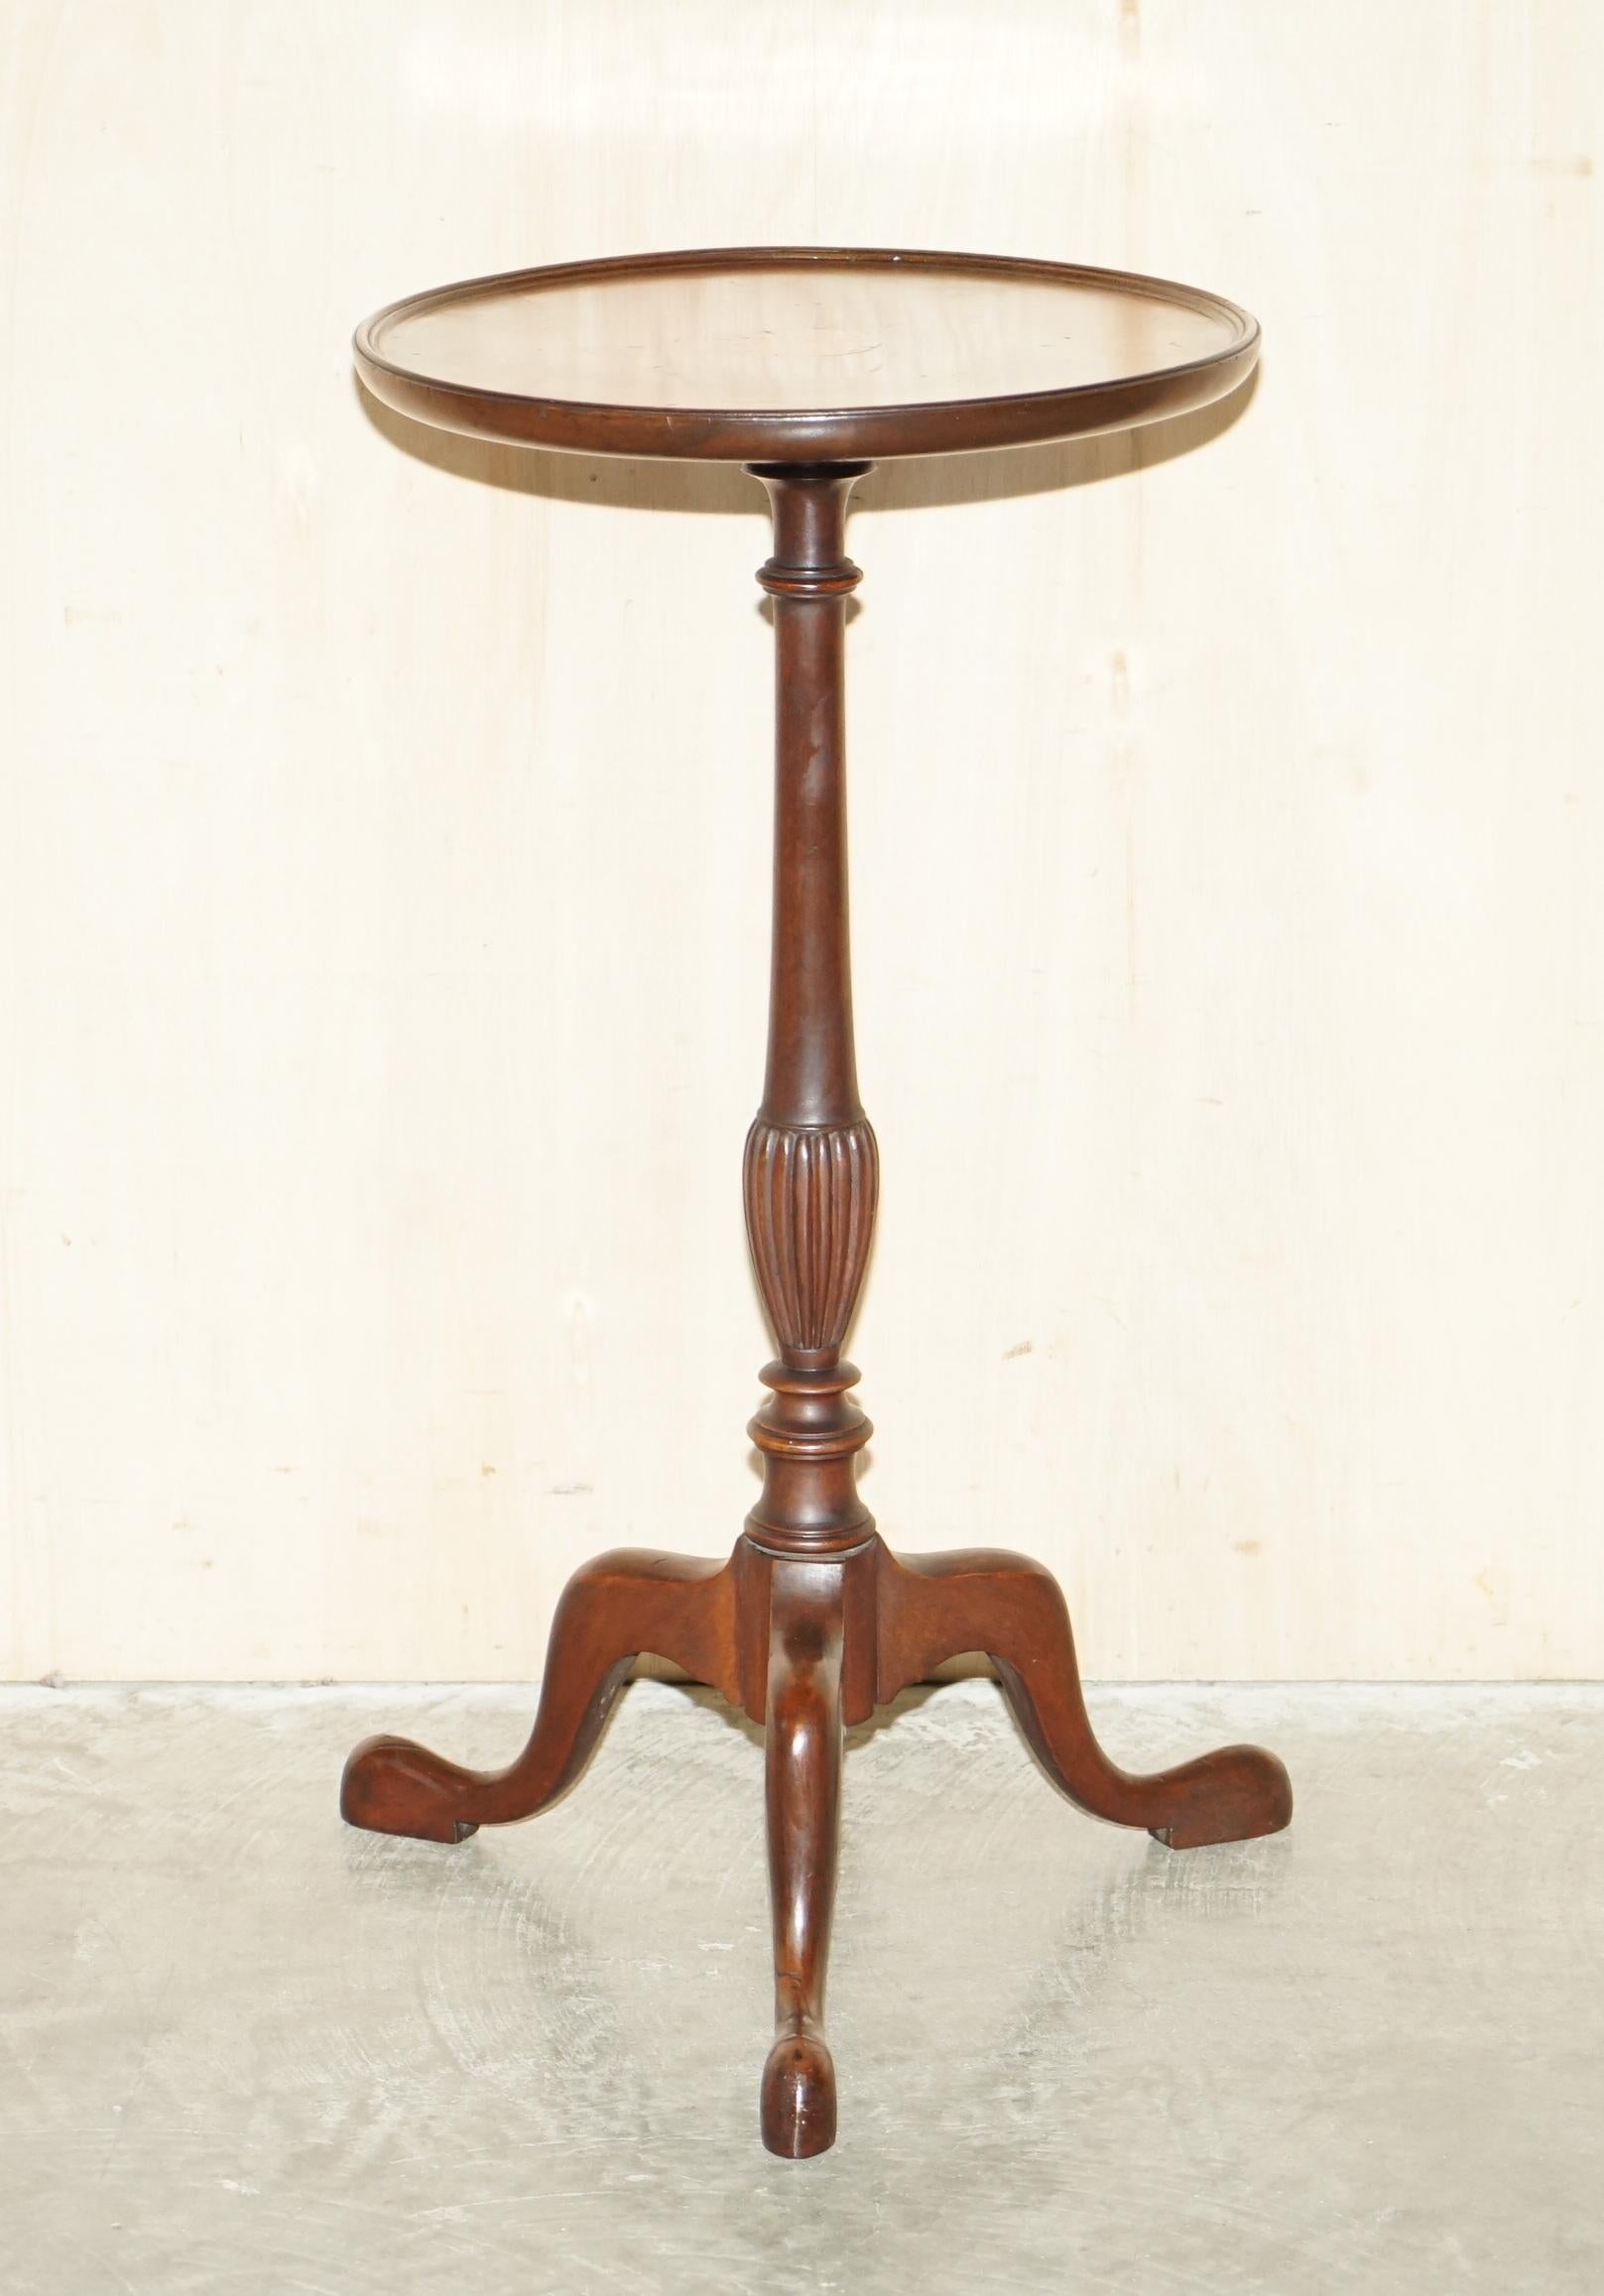 We are delighted to offer for sale this lovely circa 1920's tall Sheraton Revival tripod table 

A very good looking well made and decorative piece, it sits well in any setting and is very unitarian. The piece has the Sheraton revival inlay to the